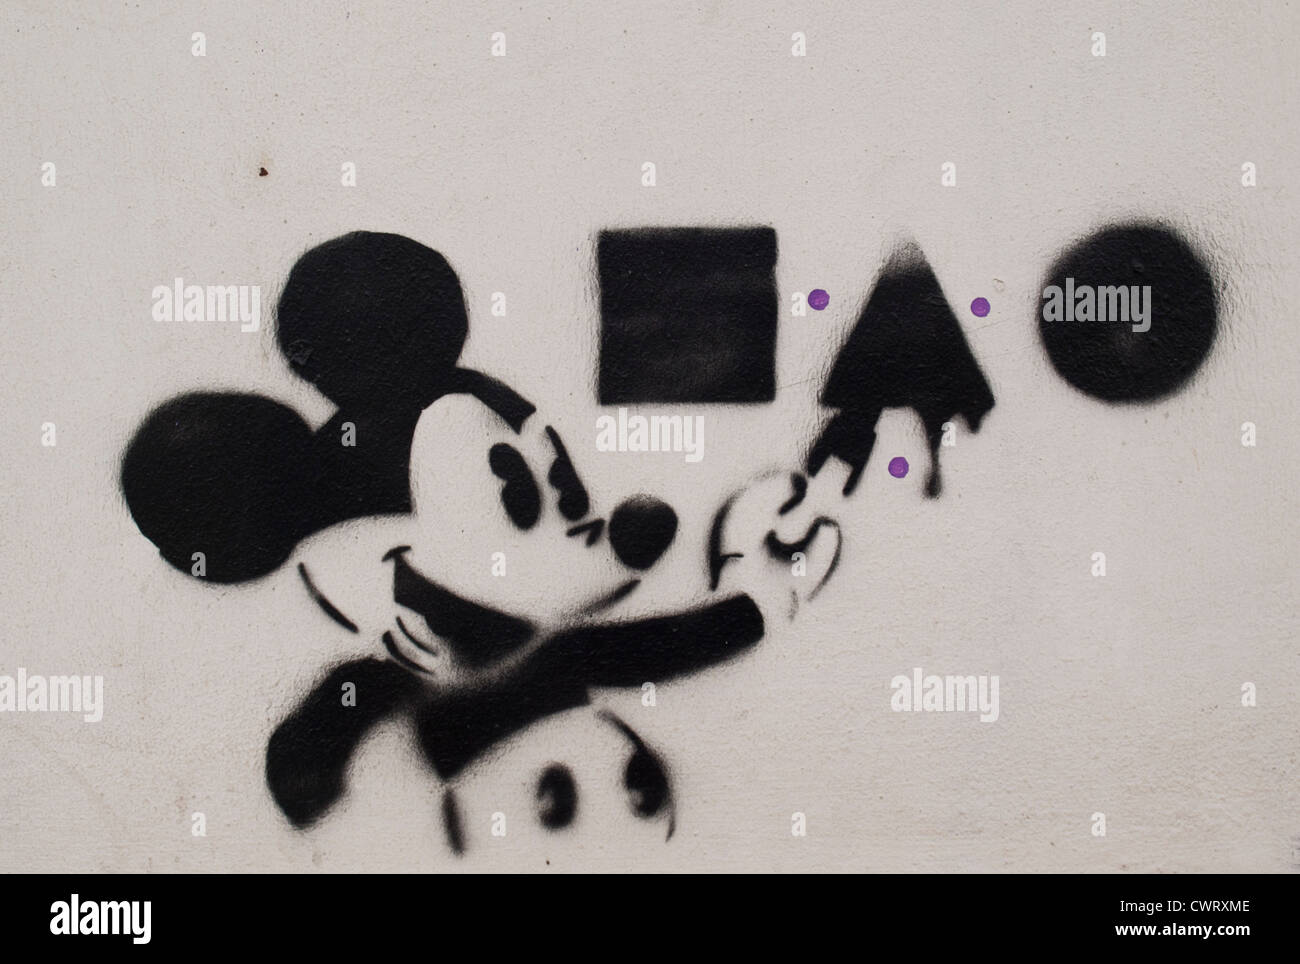 Mickey Mouse graffiti in black and white Stock Photo